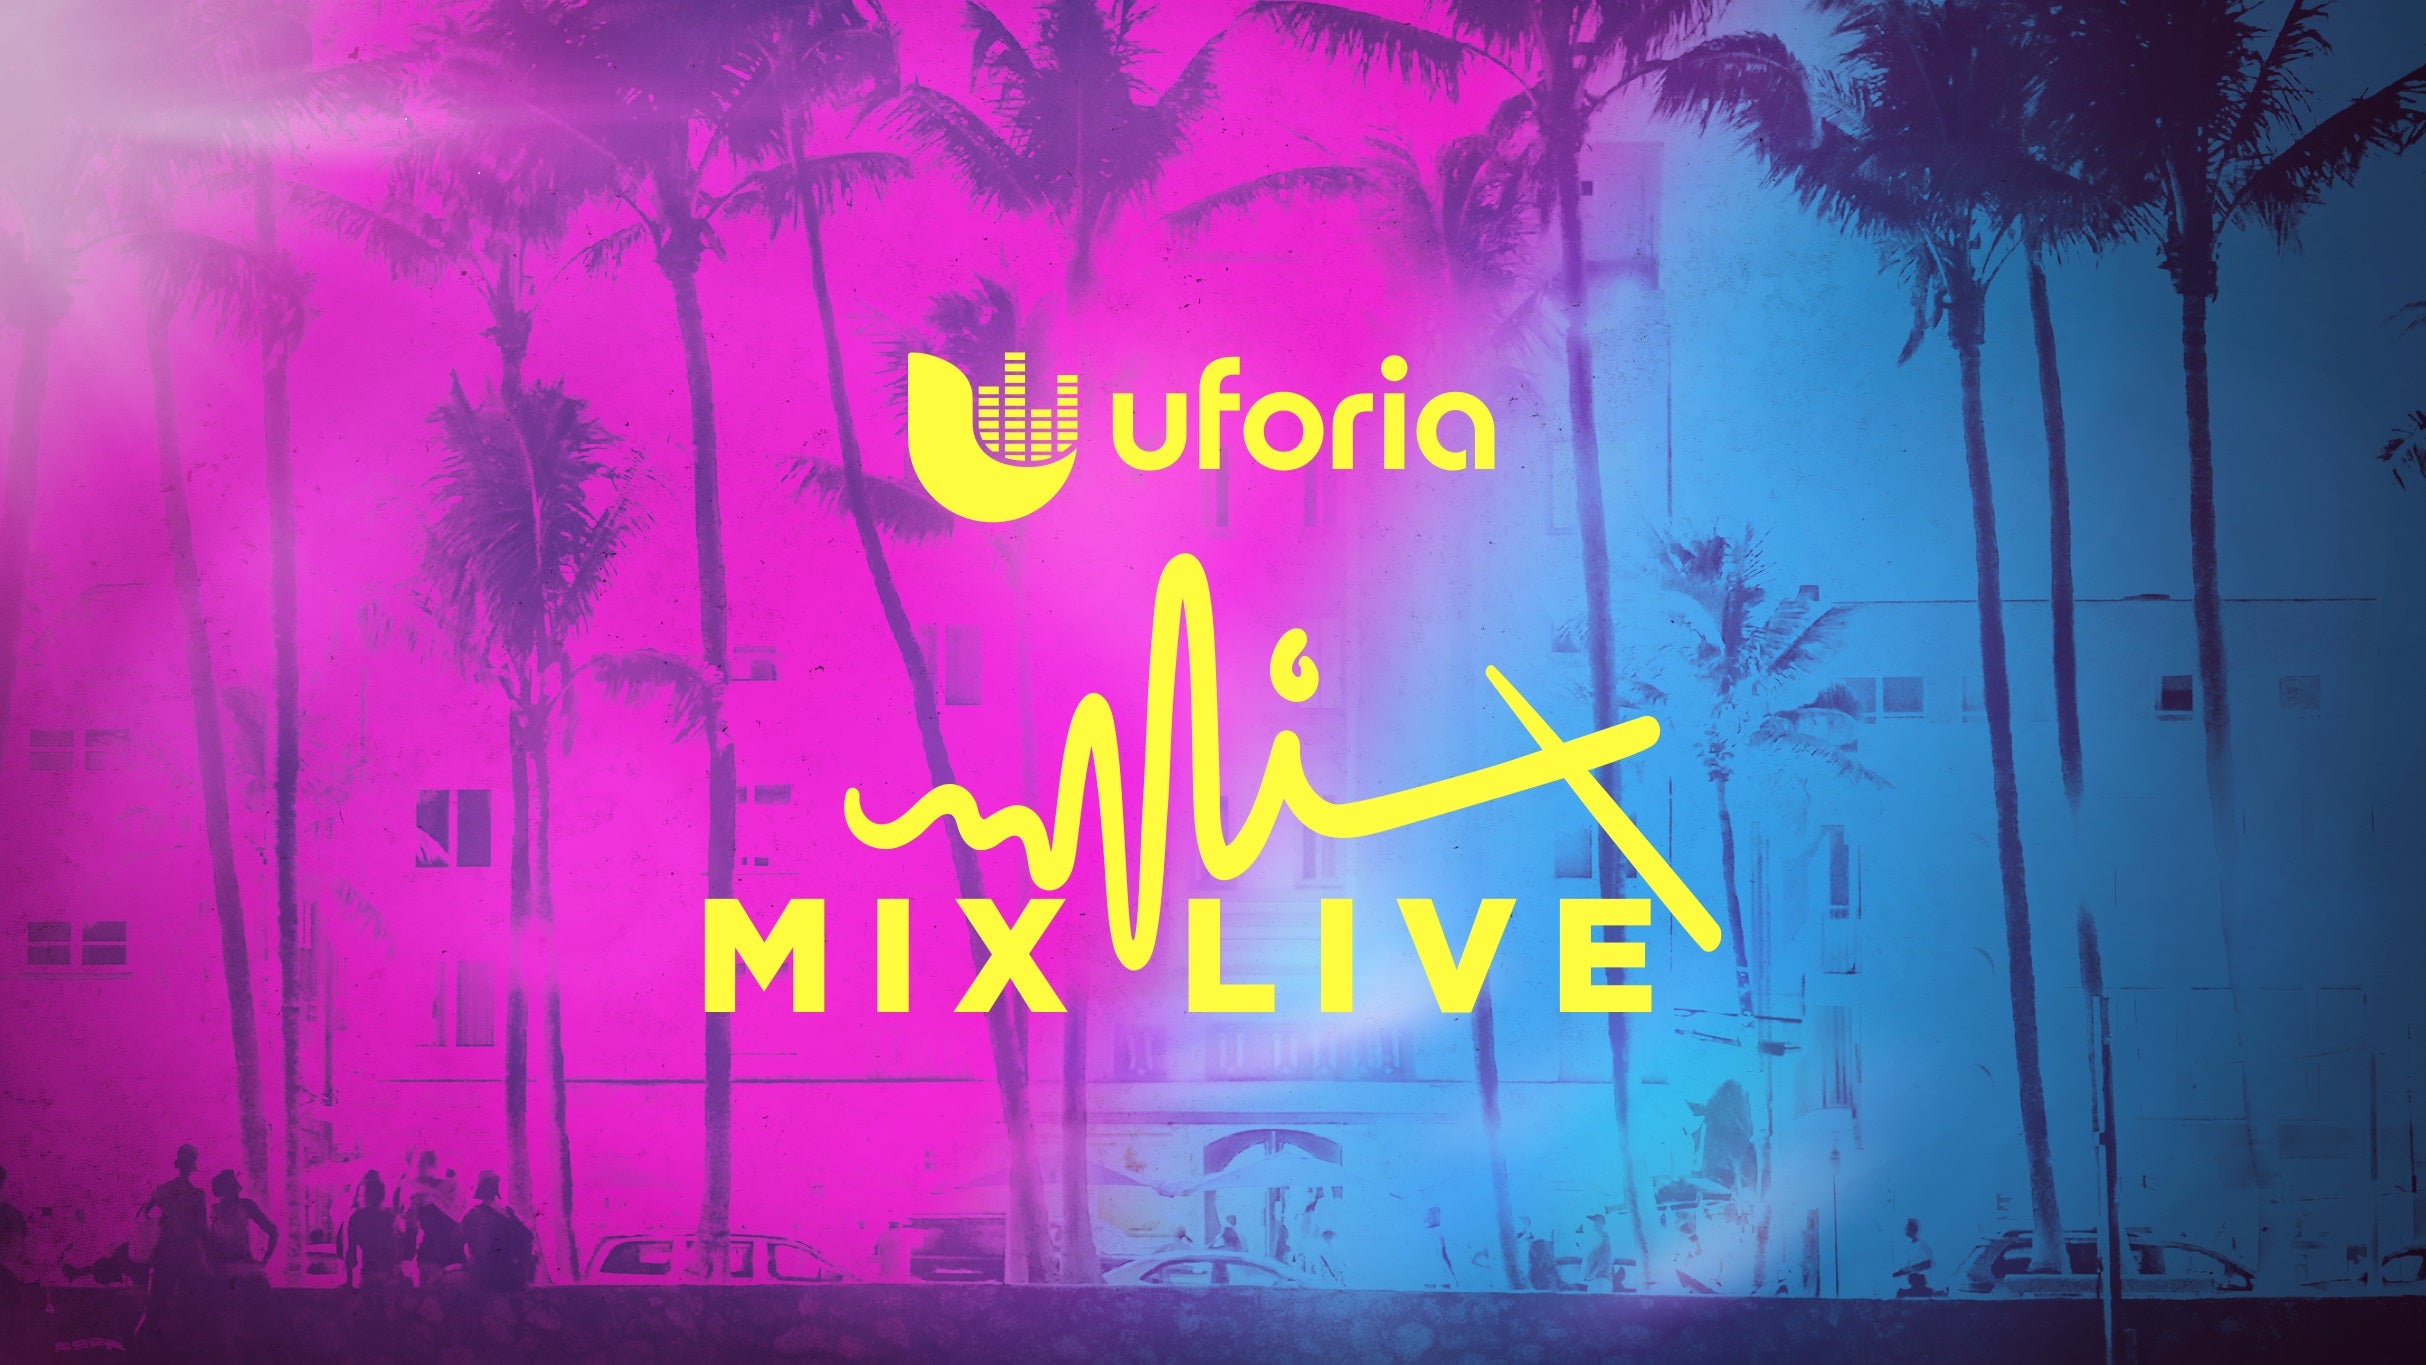 Uforia Mix Live free presale password for early tickets in Miami